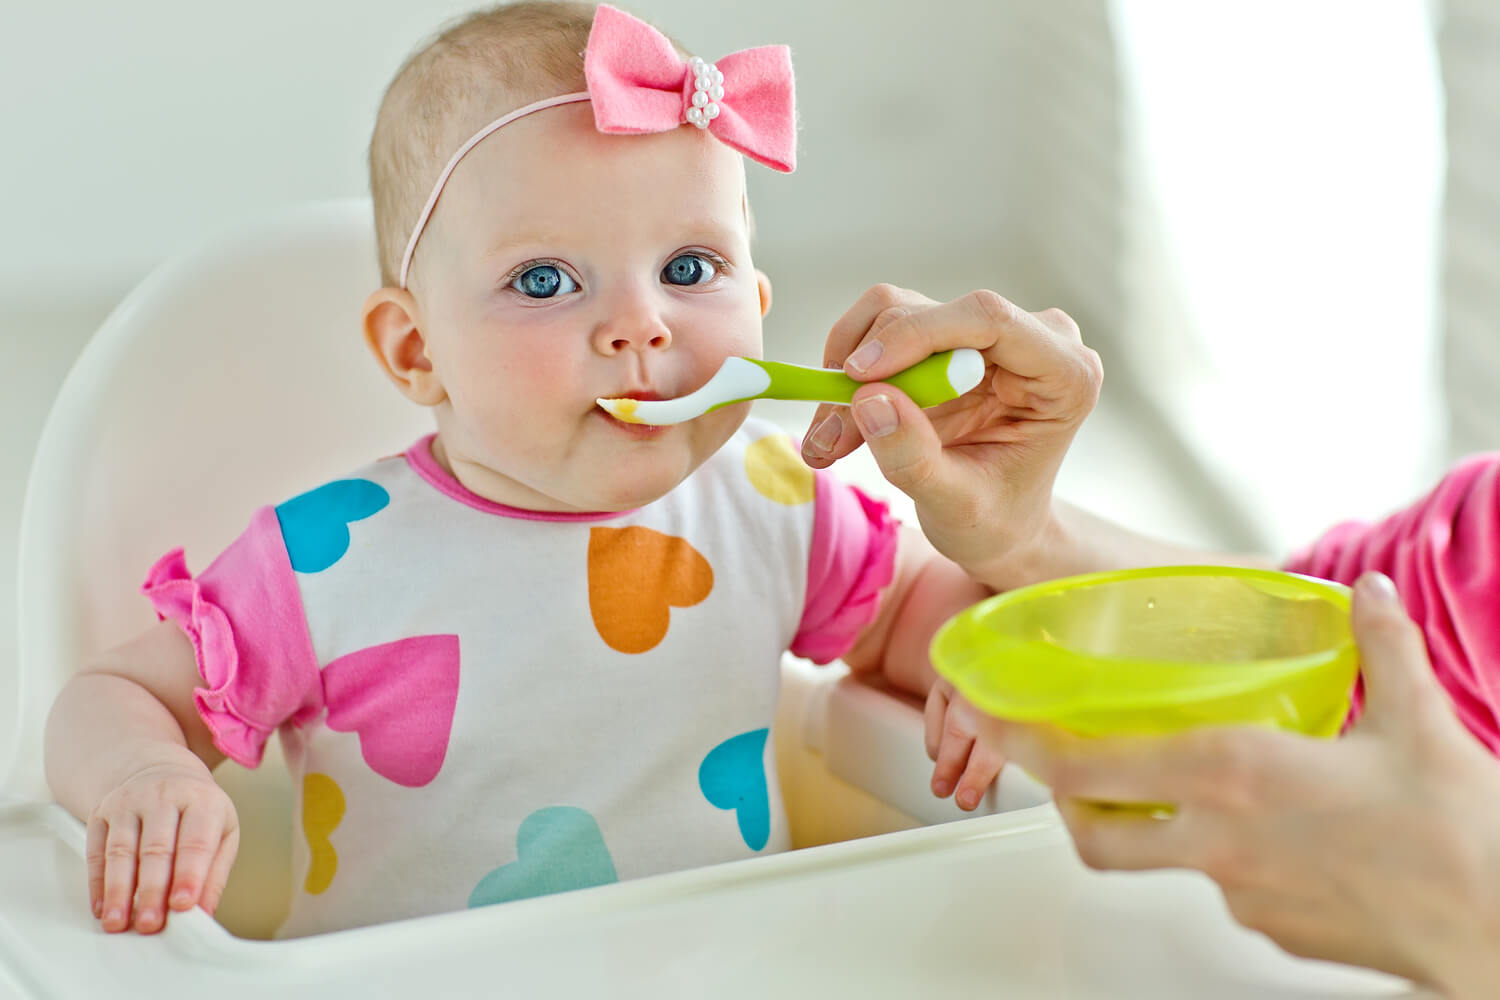 Precautions for giving cauliflower to baby